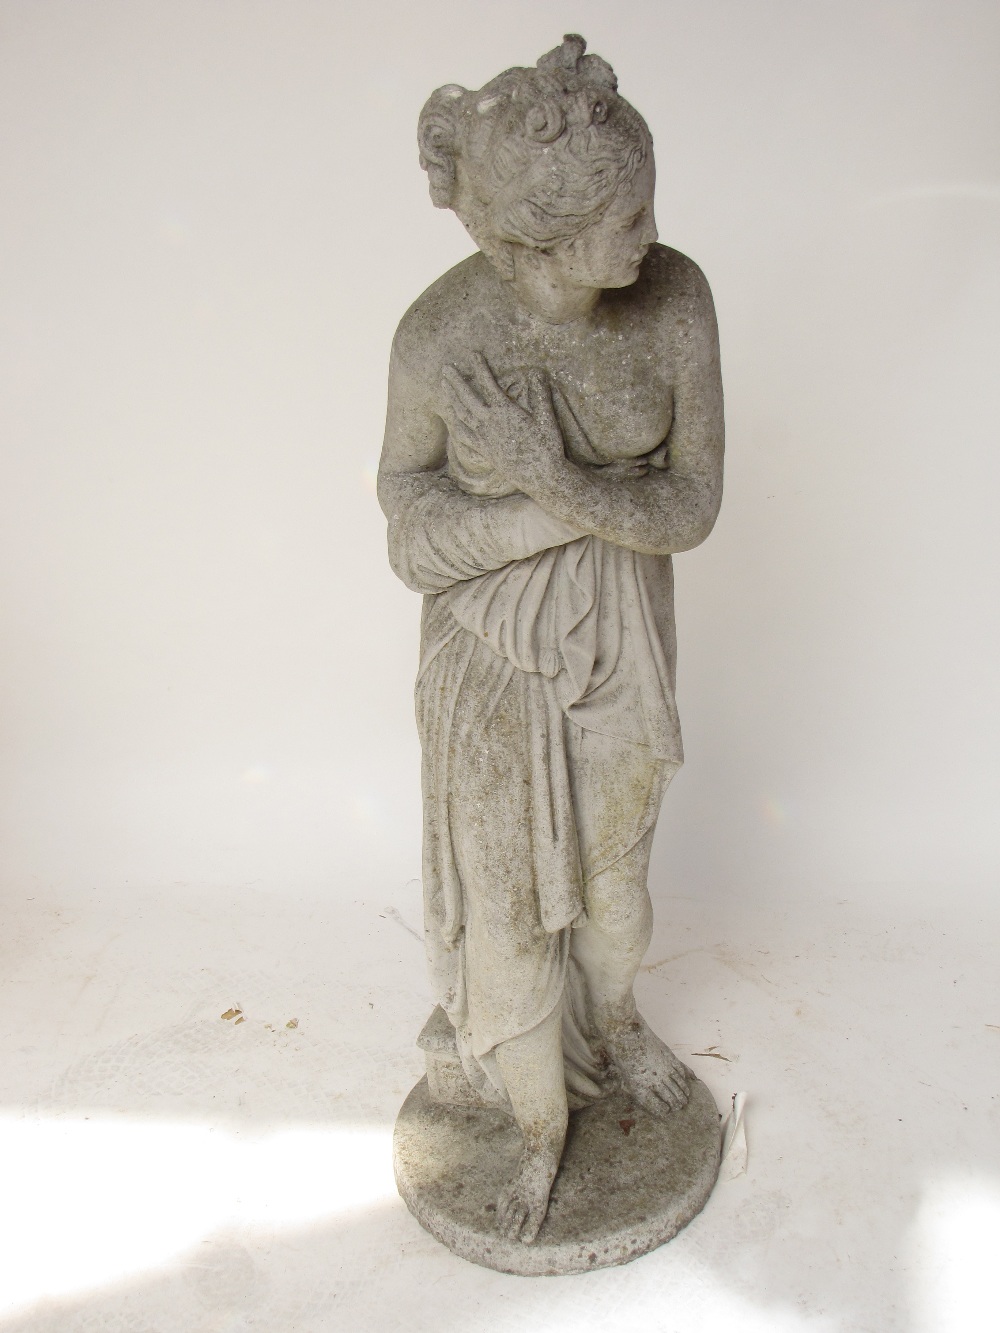 After the antique, a reconstituted figure of a semi-clad goddess, 116cm h.